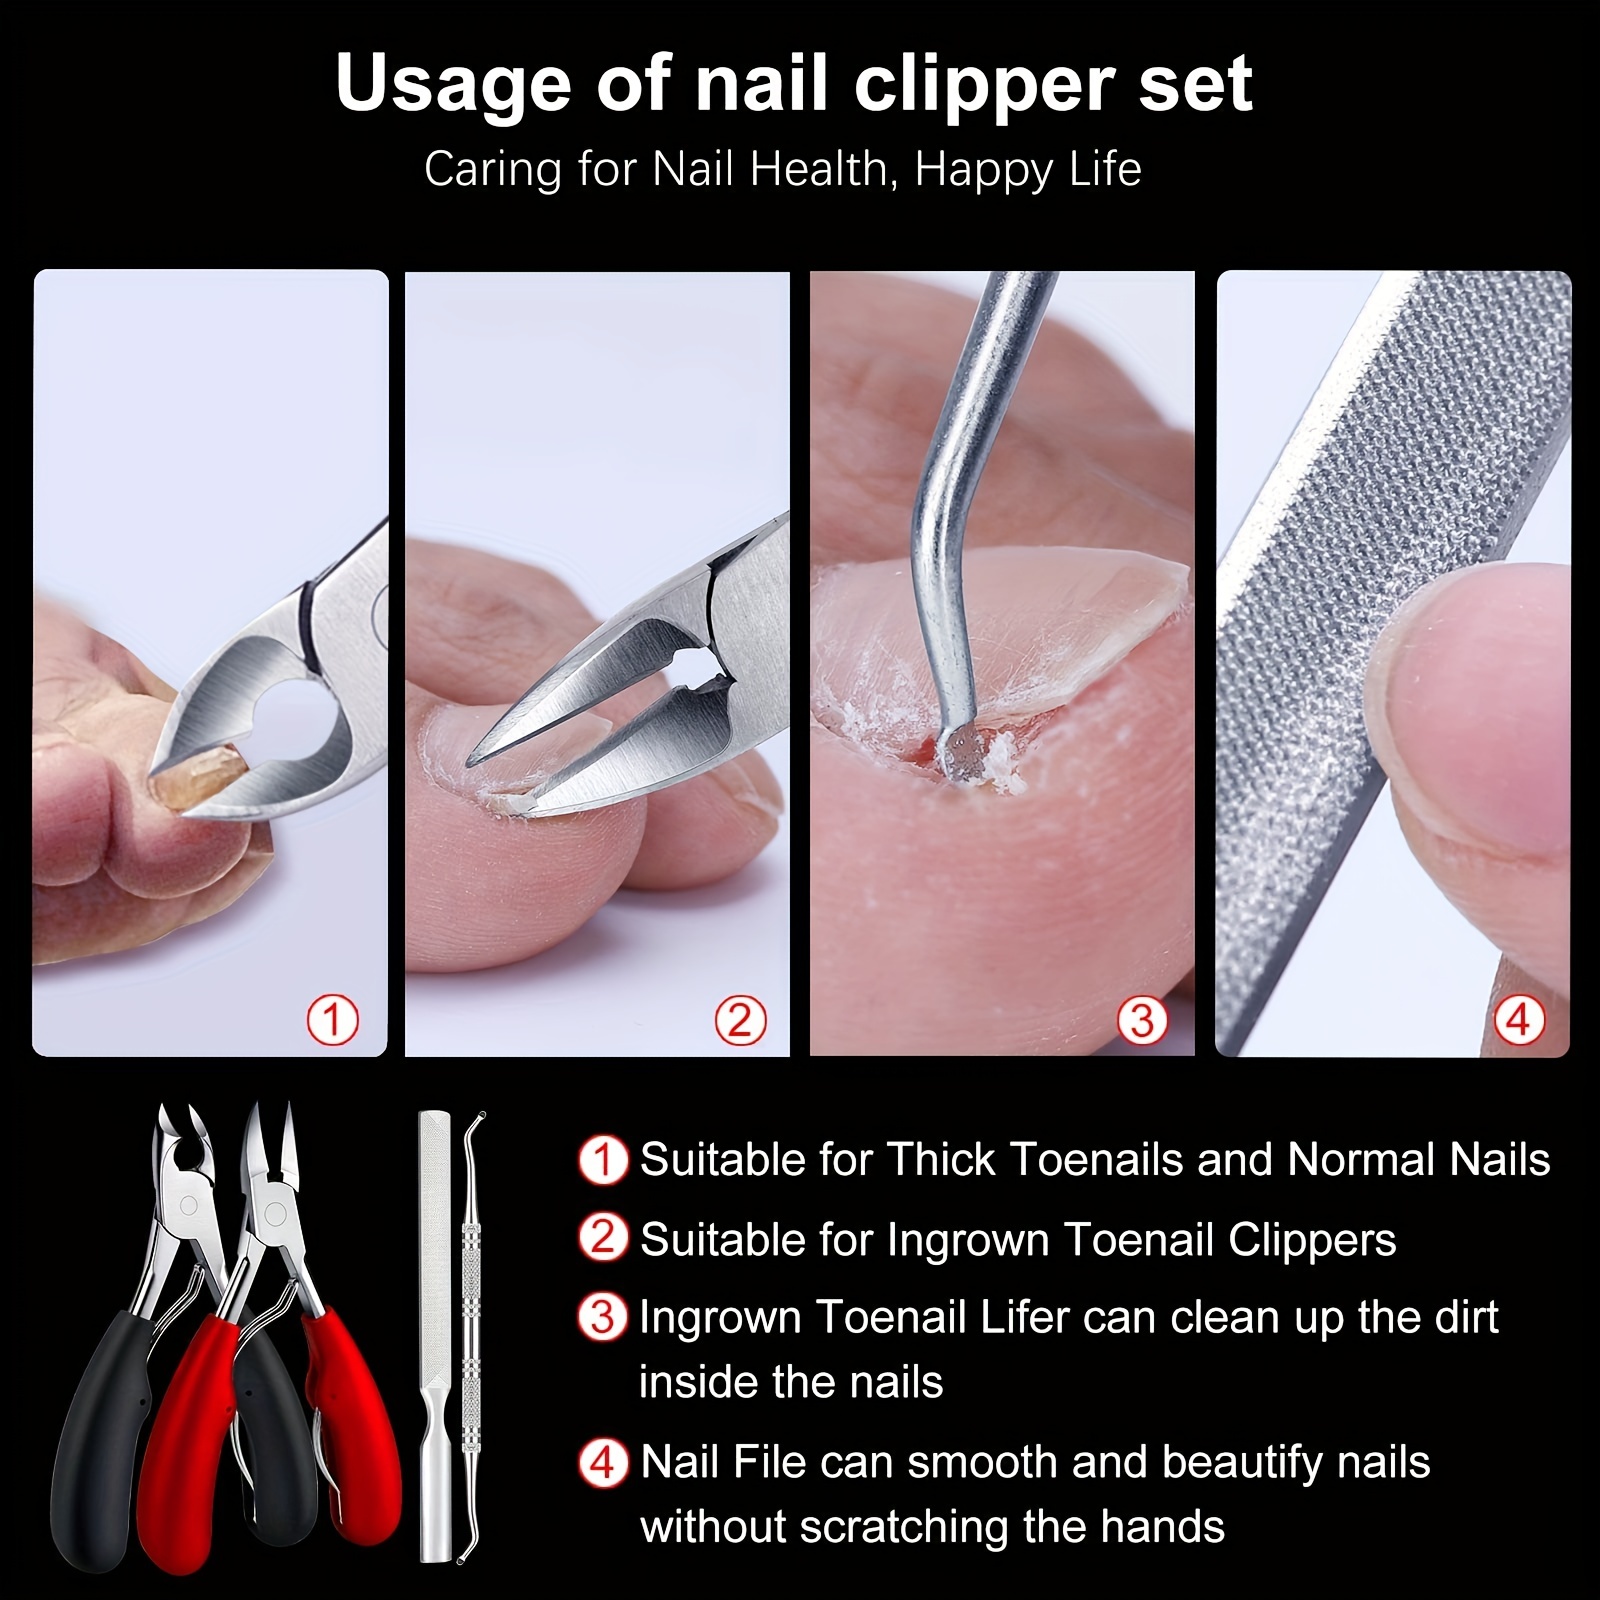 Toe Nail Clippers, Toenail Clippers For Thick Toenails Ingrown